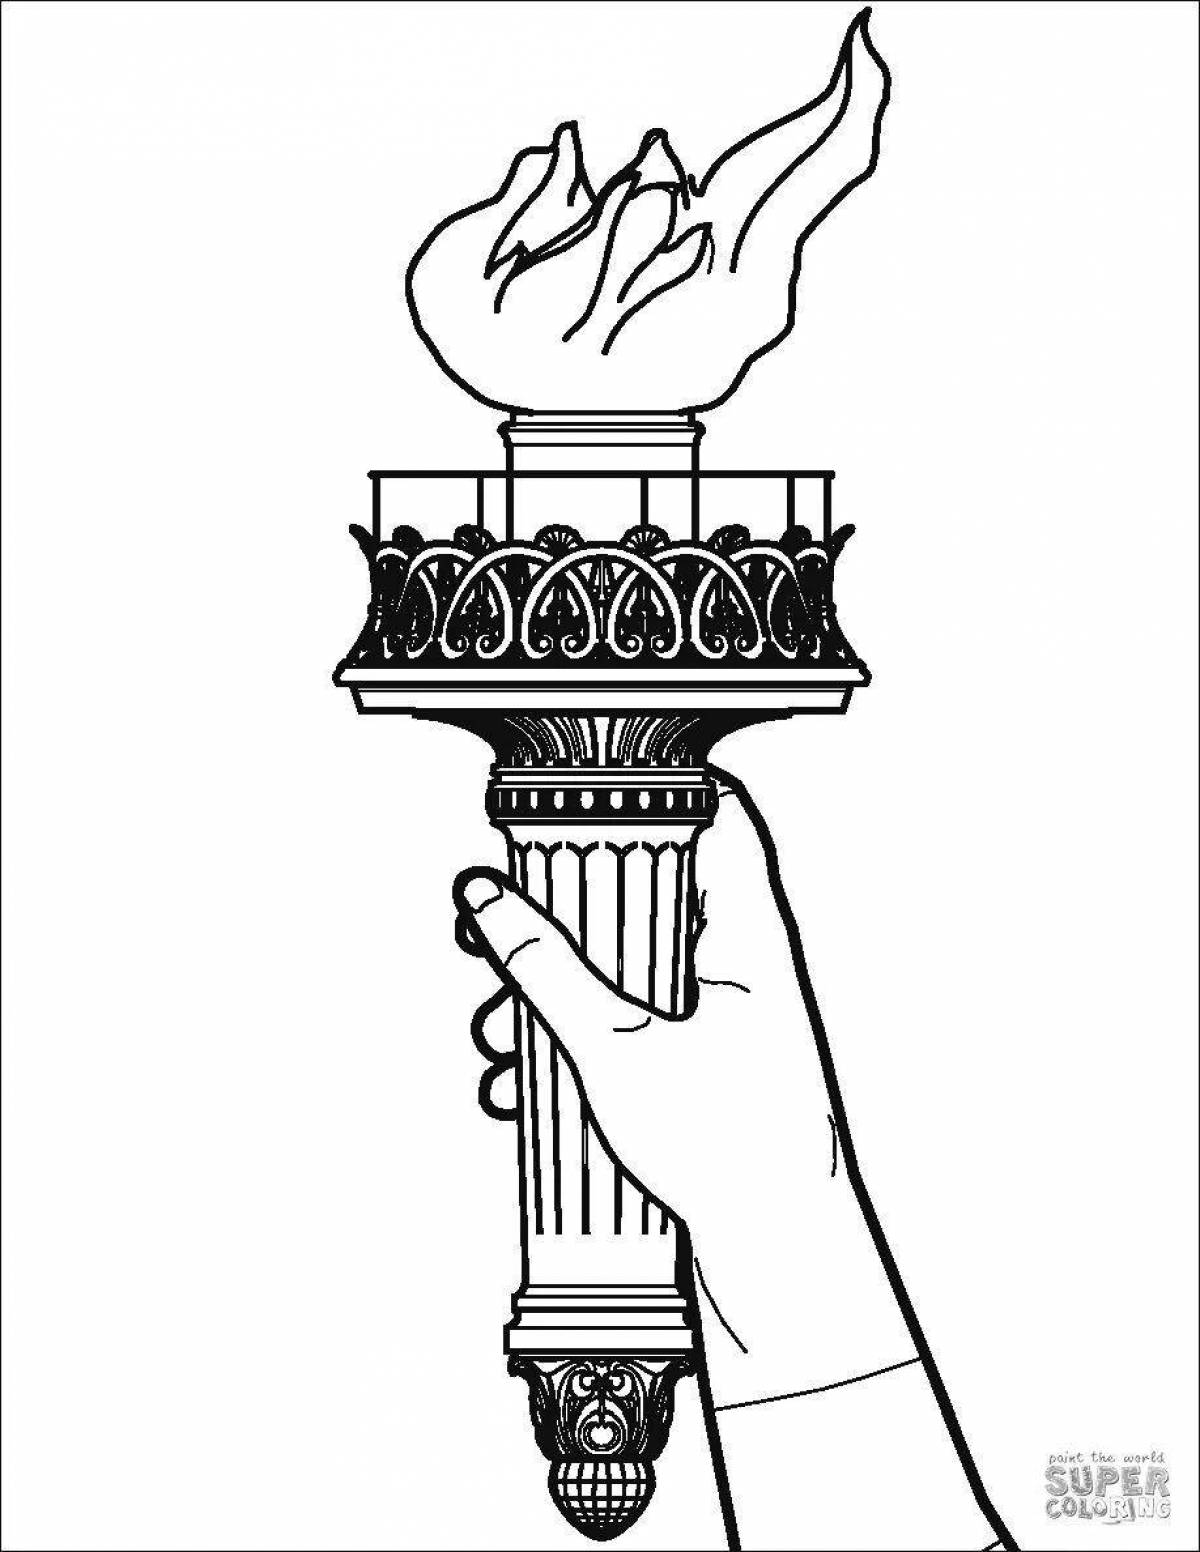 Coloring page glorious olympic torch